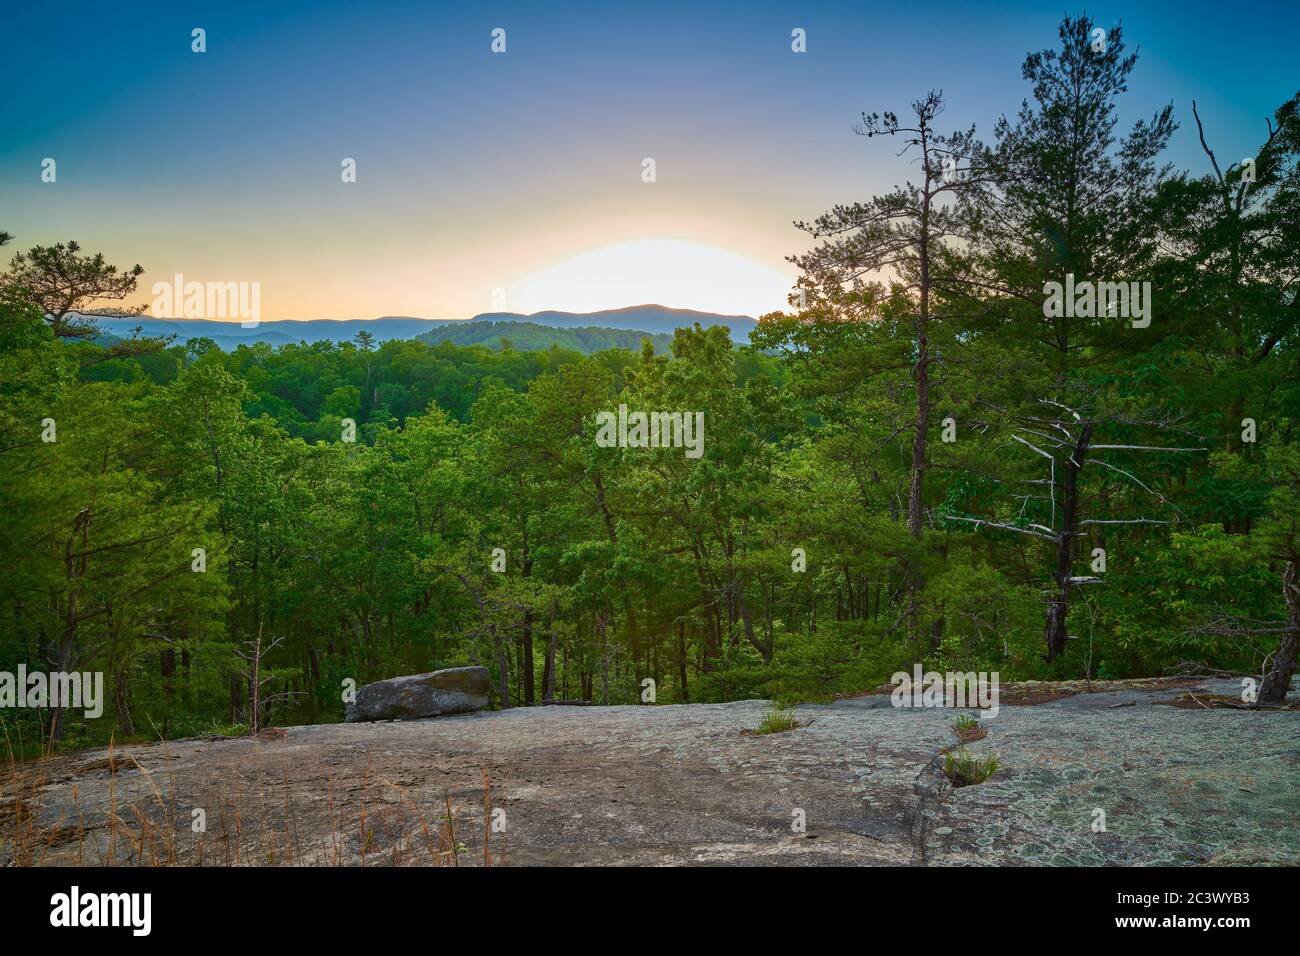 Exposed rock face with pine trees at sunset. Stock Photo